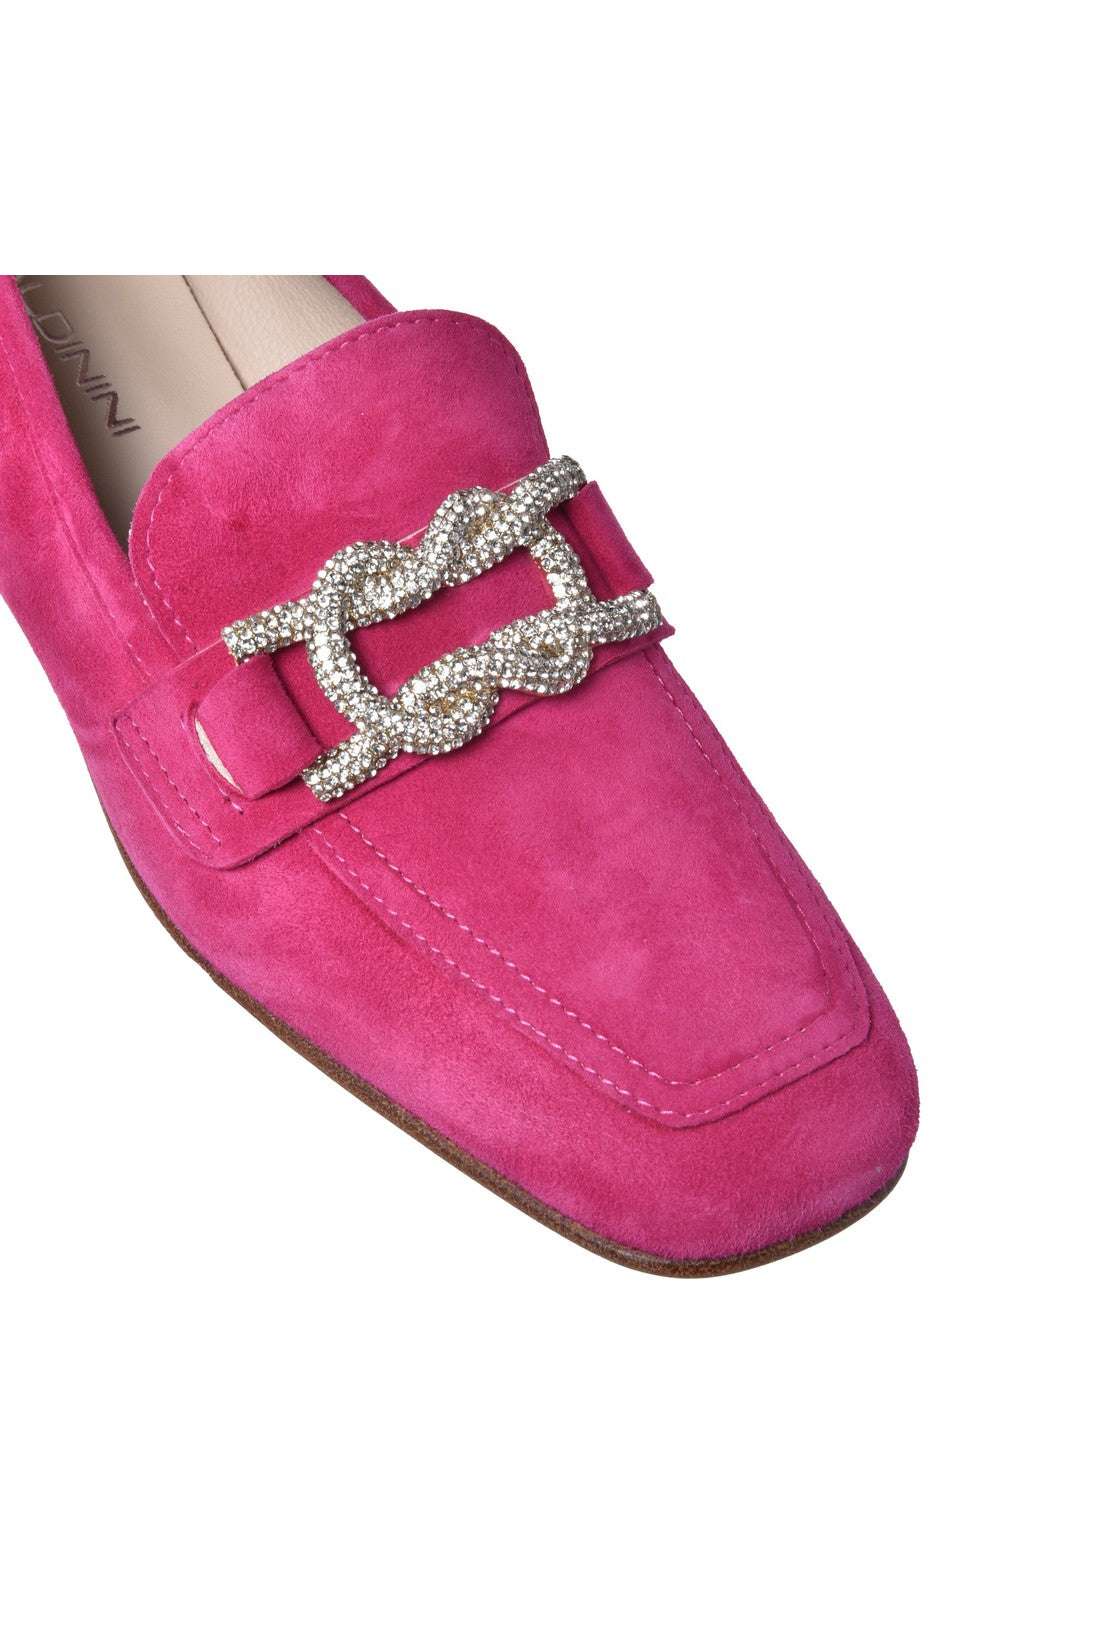 BALDININI-OUTLET-SALE-Loafer-in-fuchsia-suede-Halbschuhe-ARCHIVE-COLLECTION-4.jpg